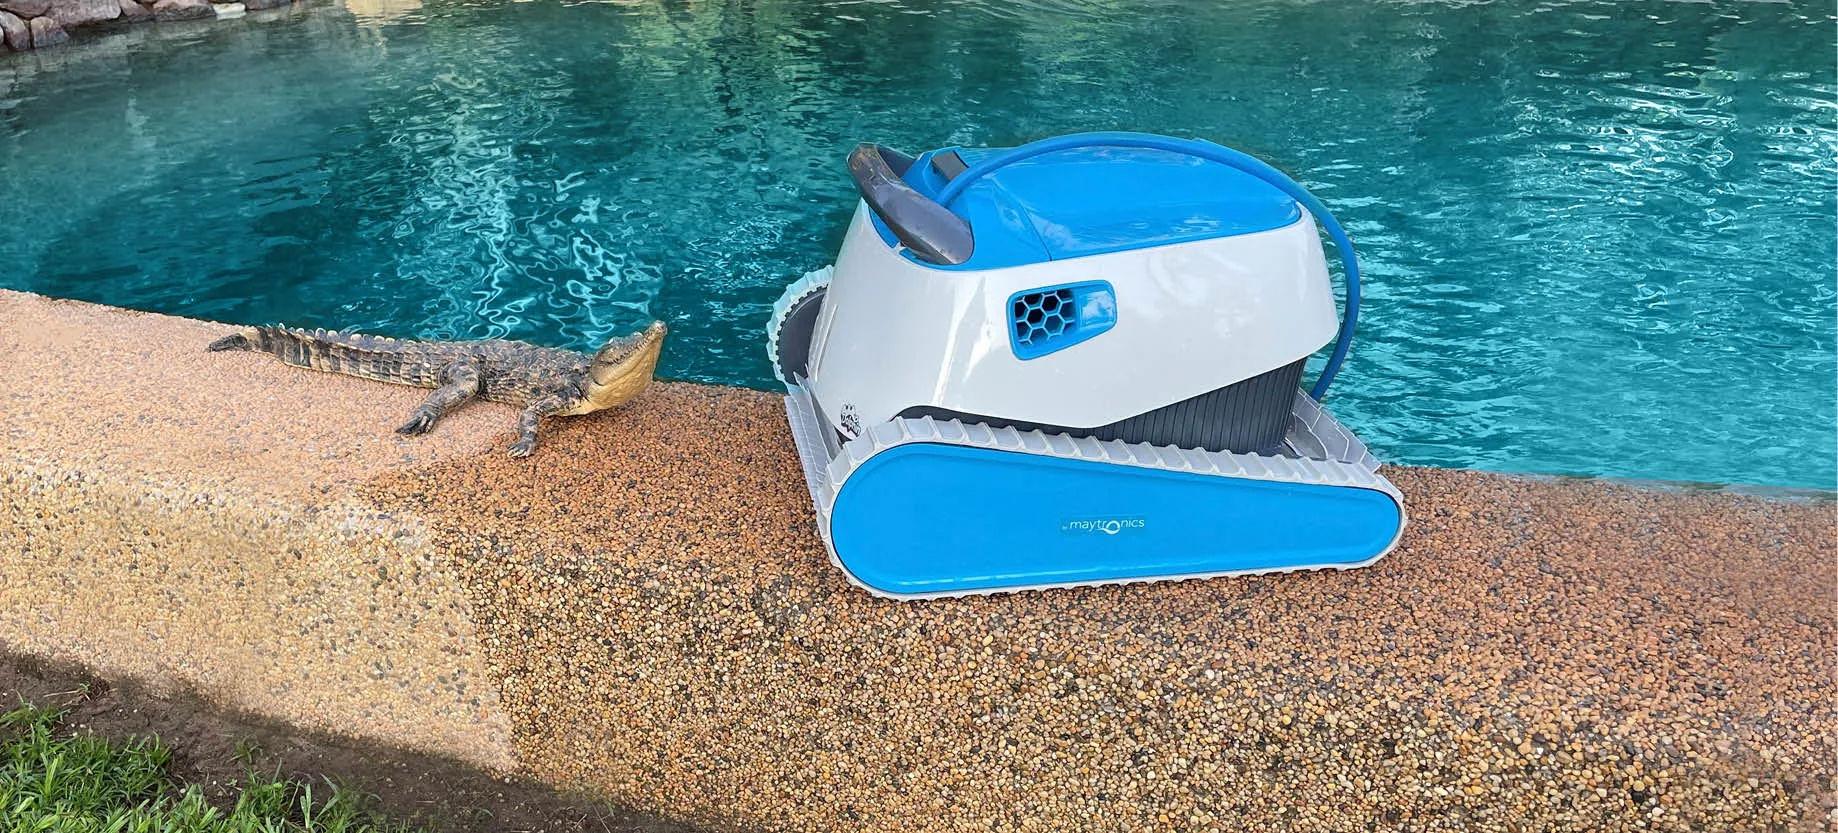 The croc and the dolphin for a clean pool